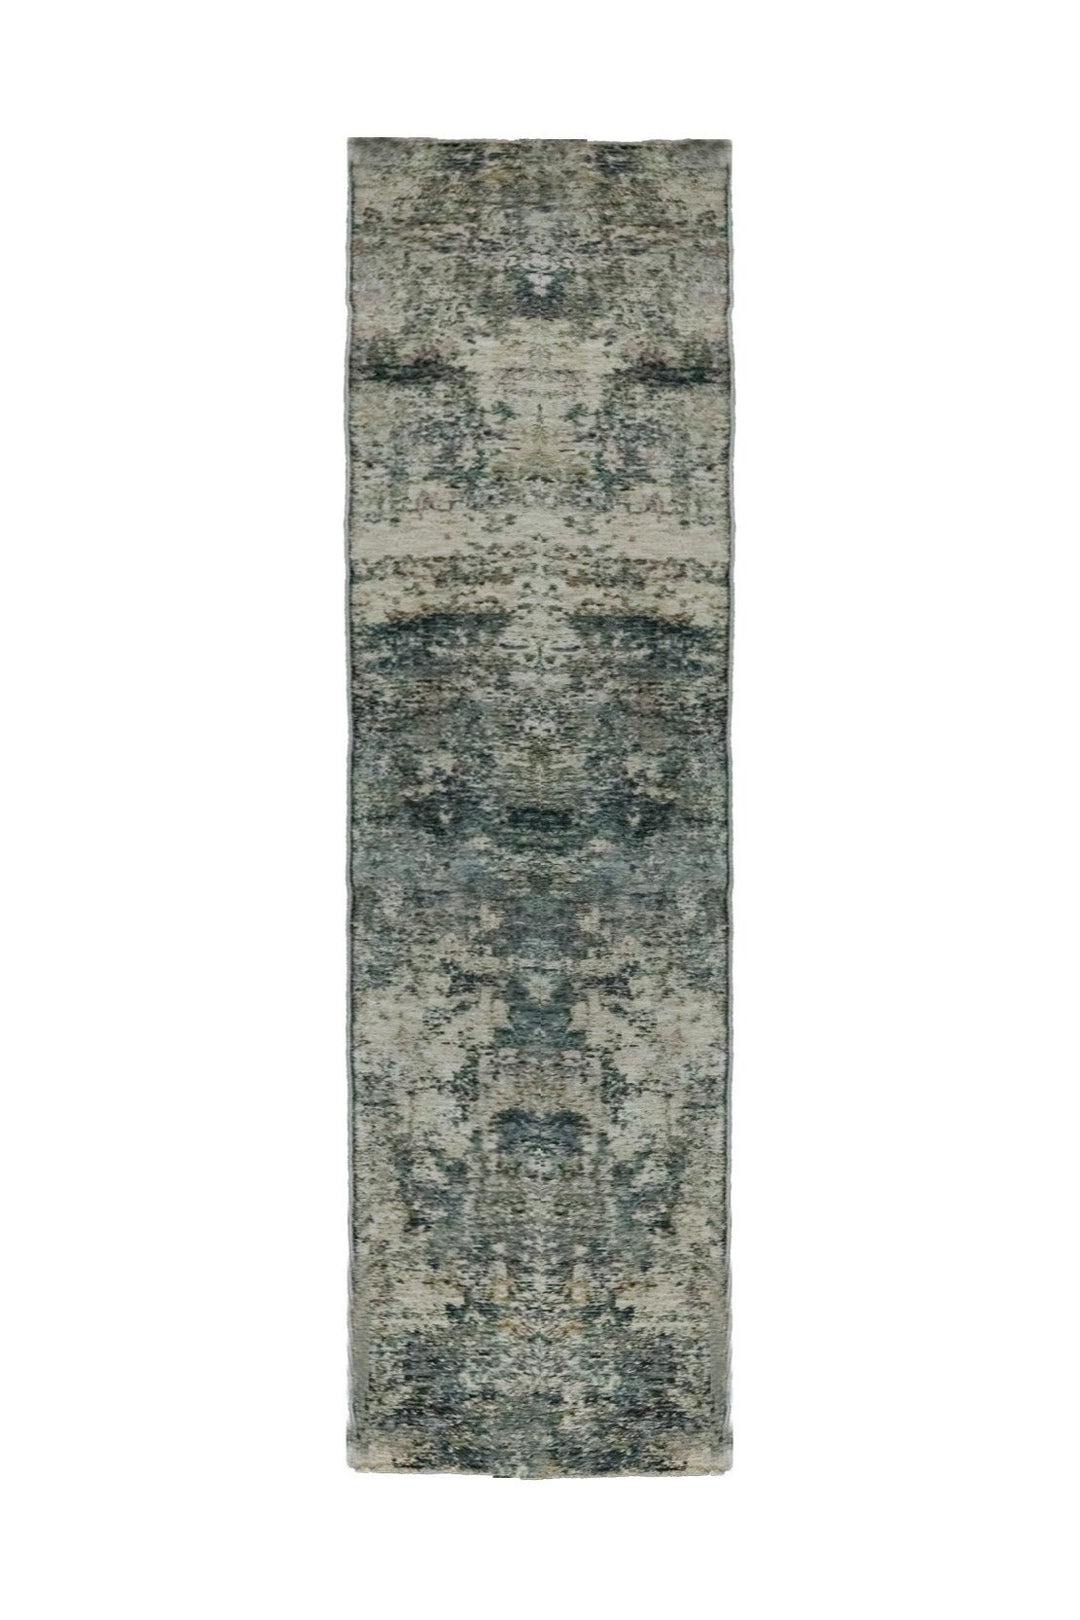 Turkish Modern Festival Plus Rug - 1.8 x 9.3 FT - Gray - Superior Comfort, Modern Style Accent Rugs - V Surfaces